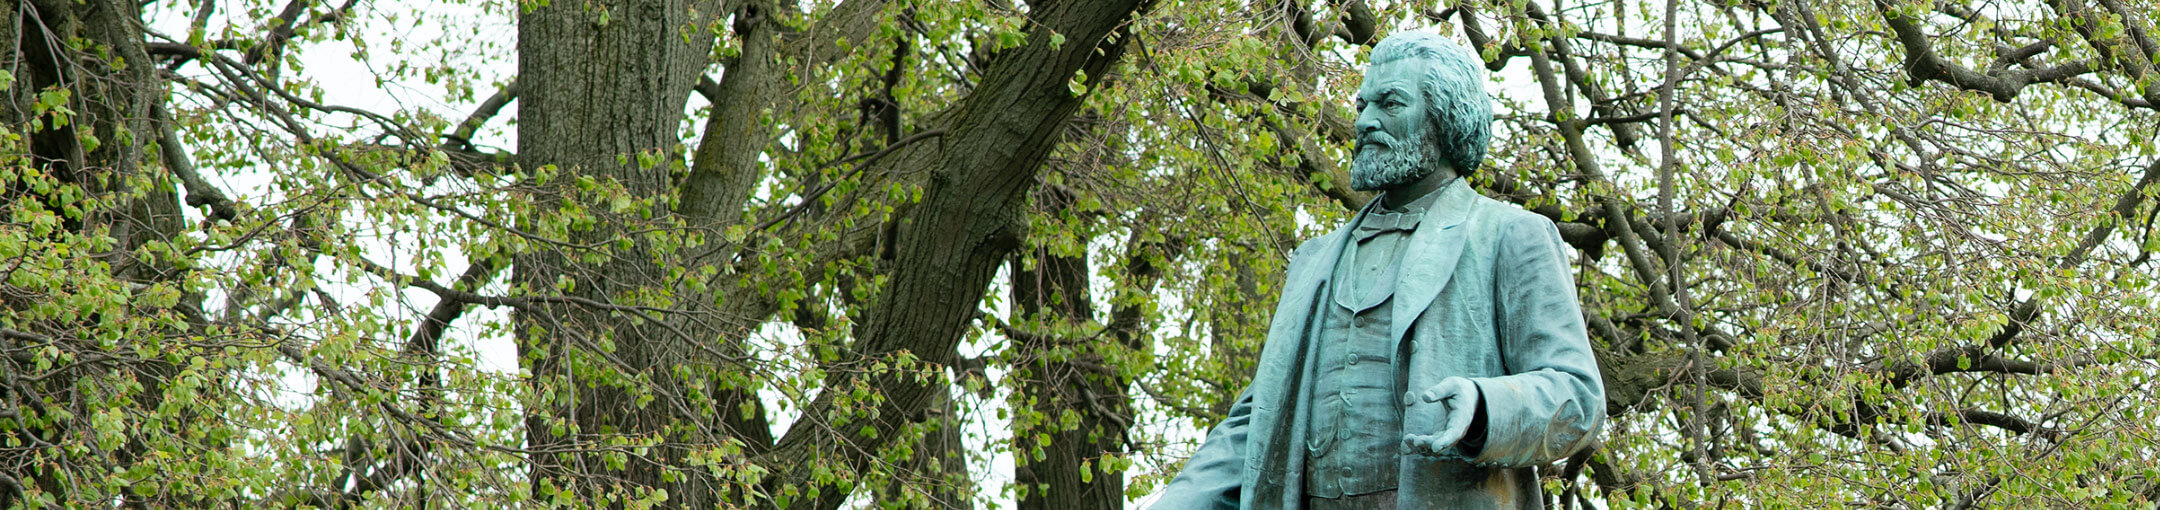 A statue of Frederick Douglass in one of Rochester’s public parks.